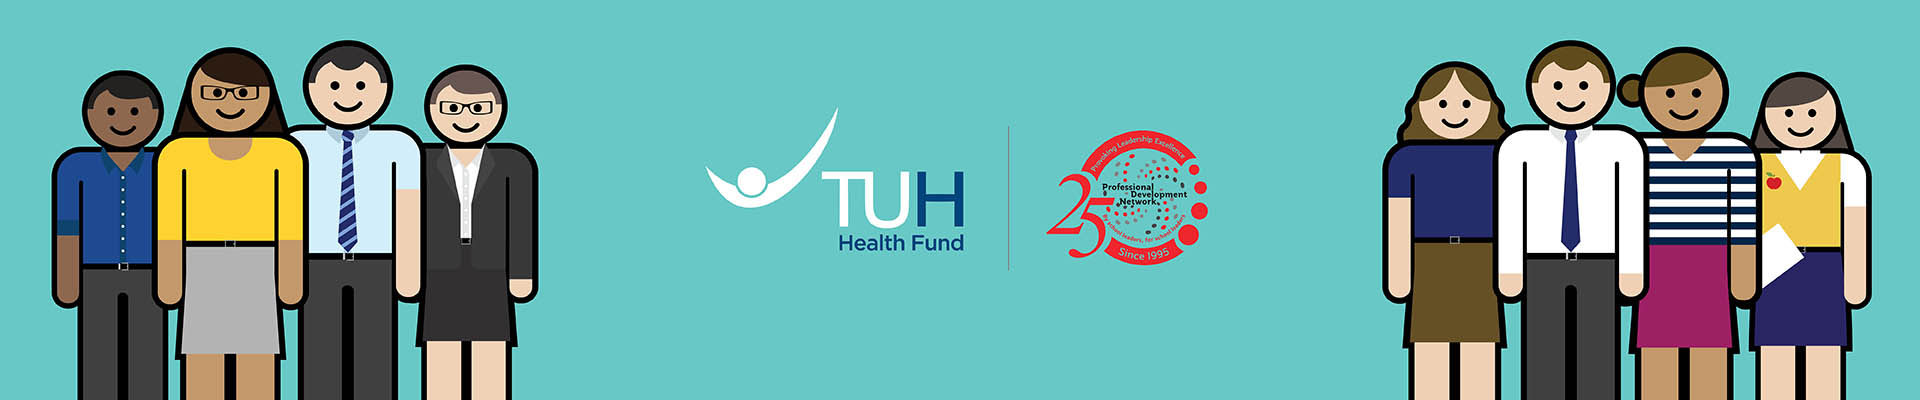 TUH health fund and professional development network logo banner